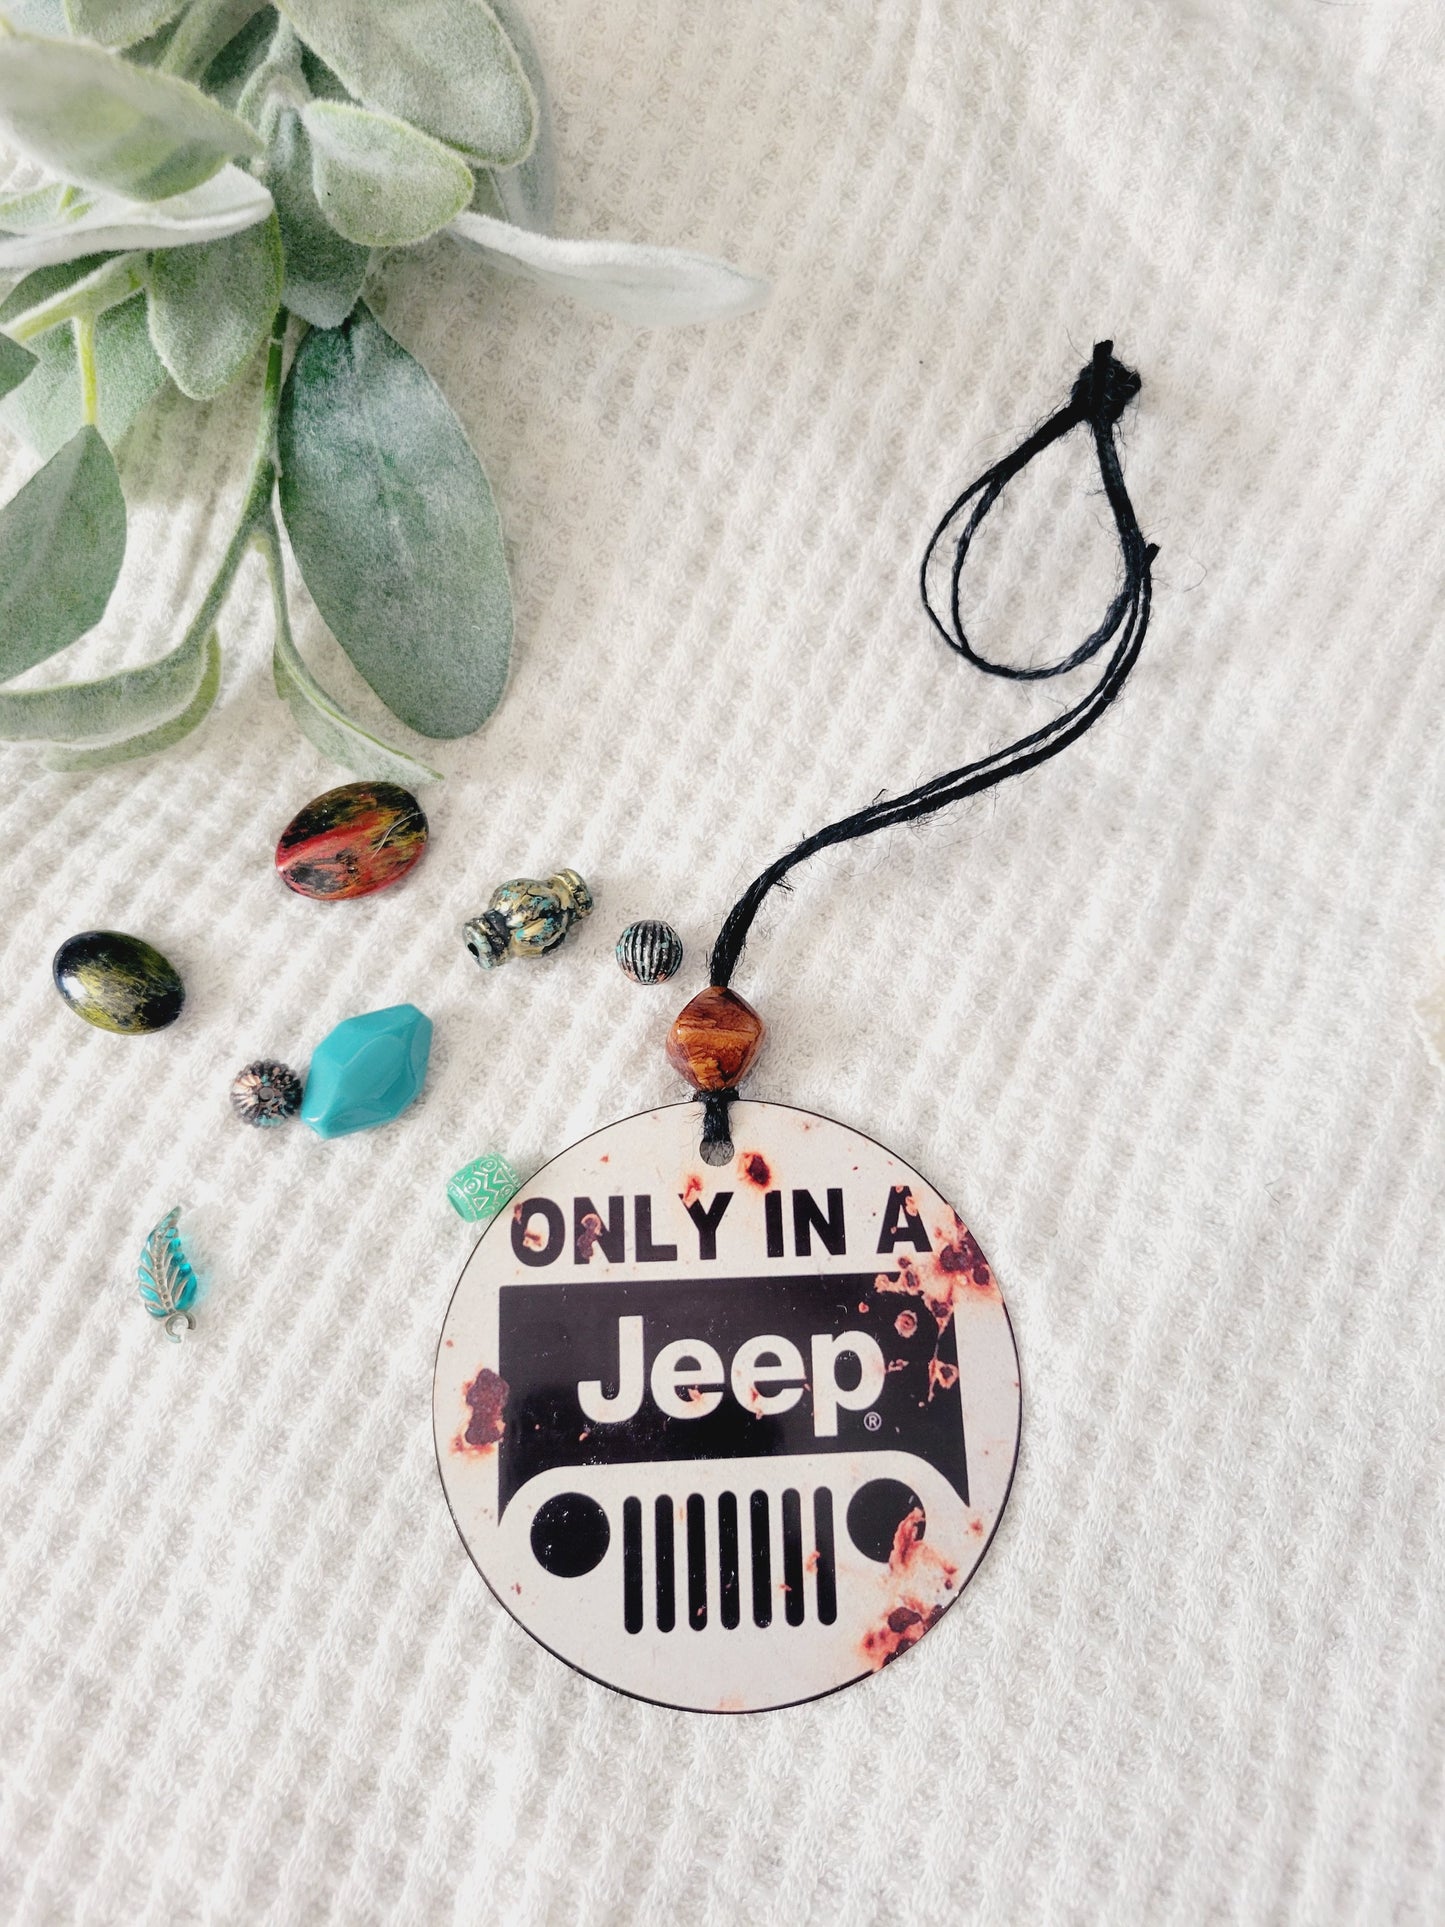 Only in a Jeep rear view mirror charm, car accessory with bead